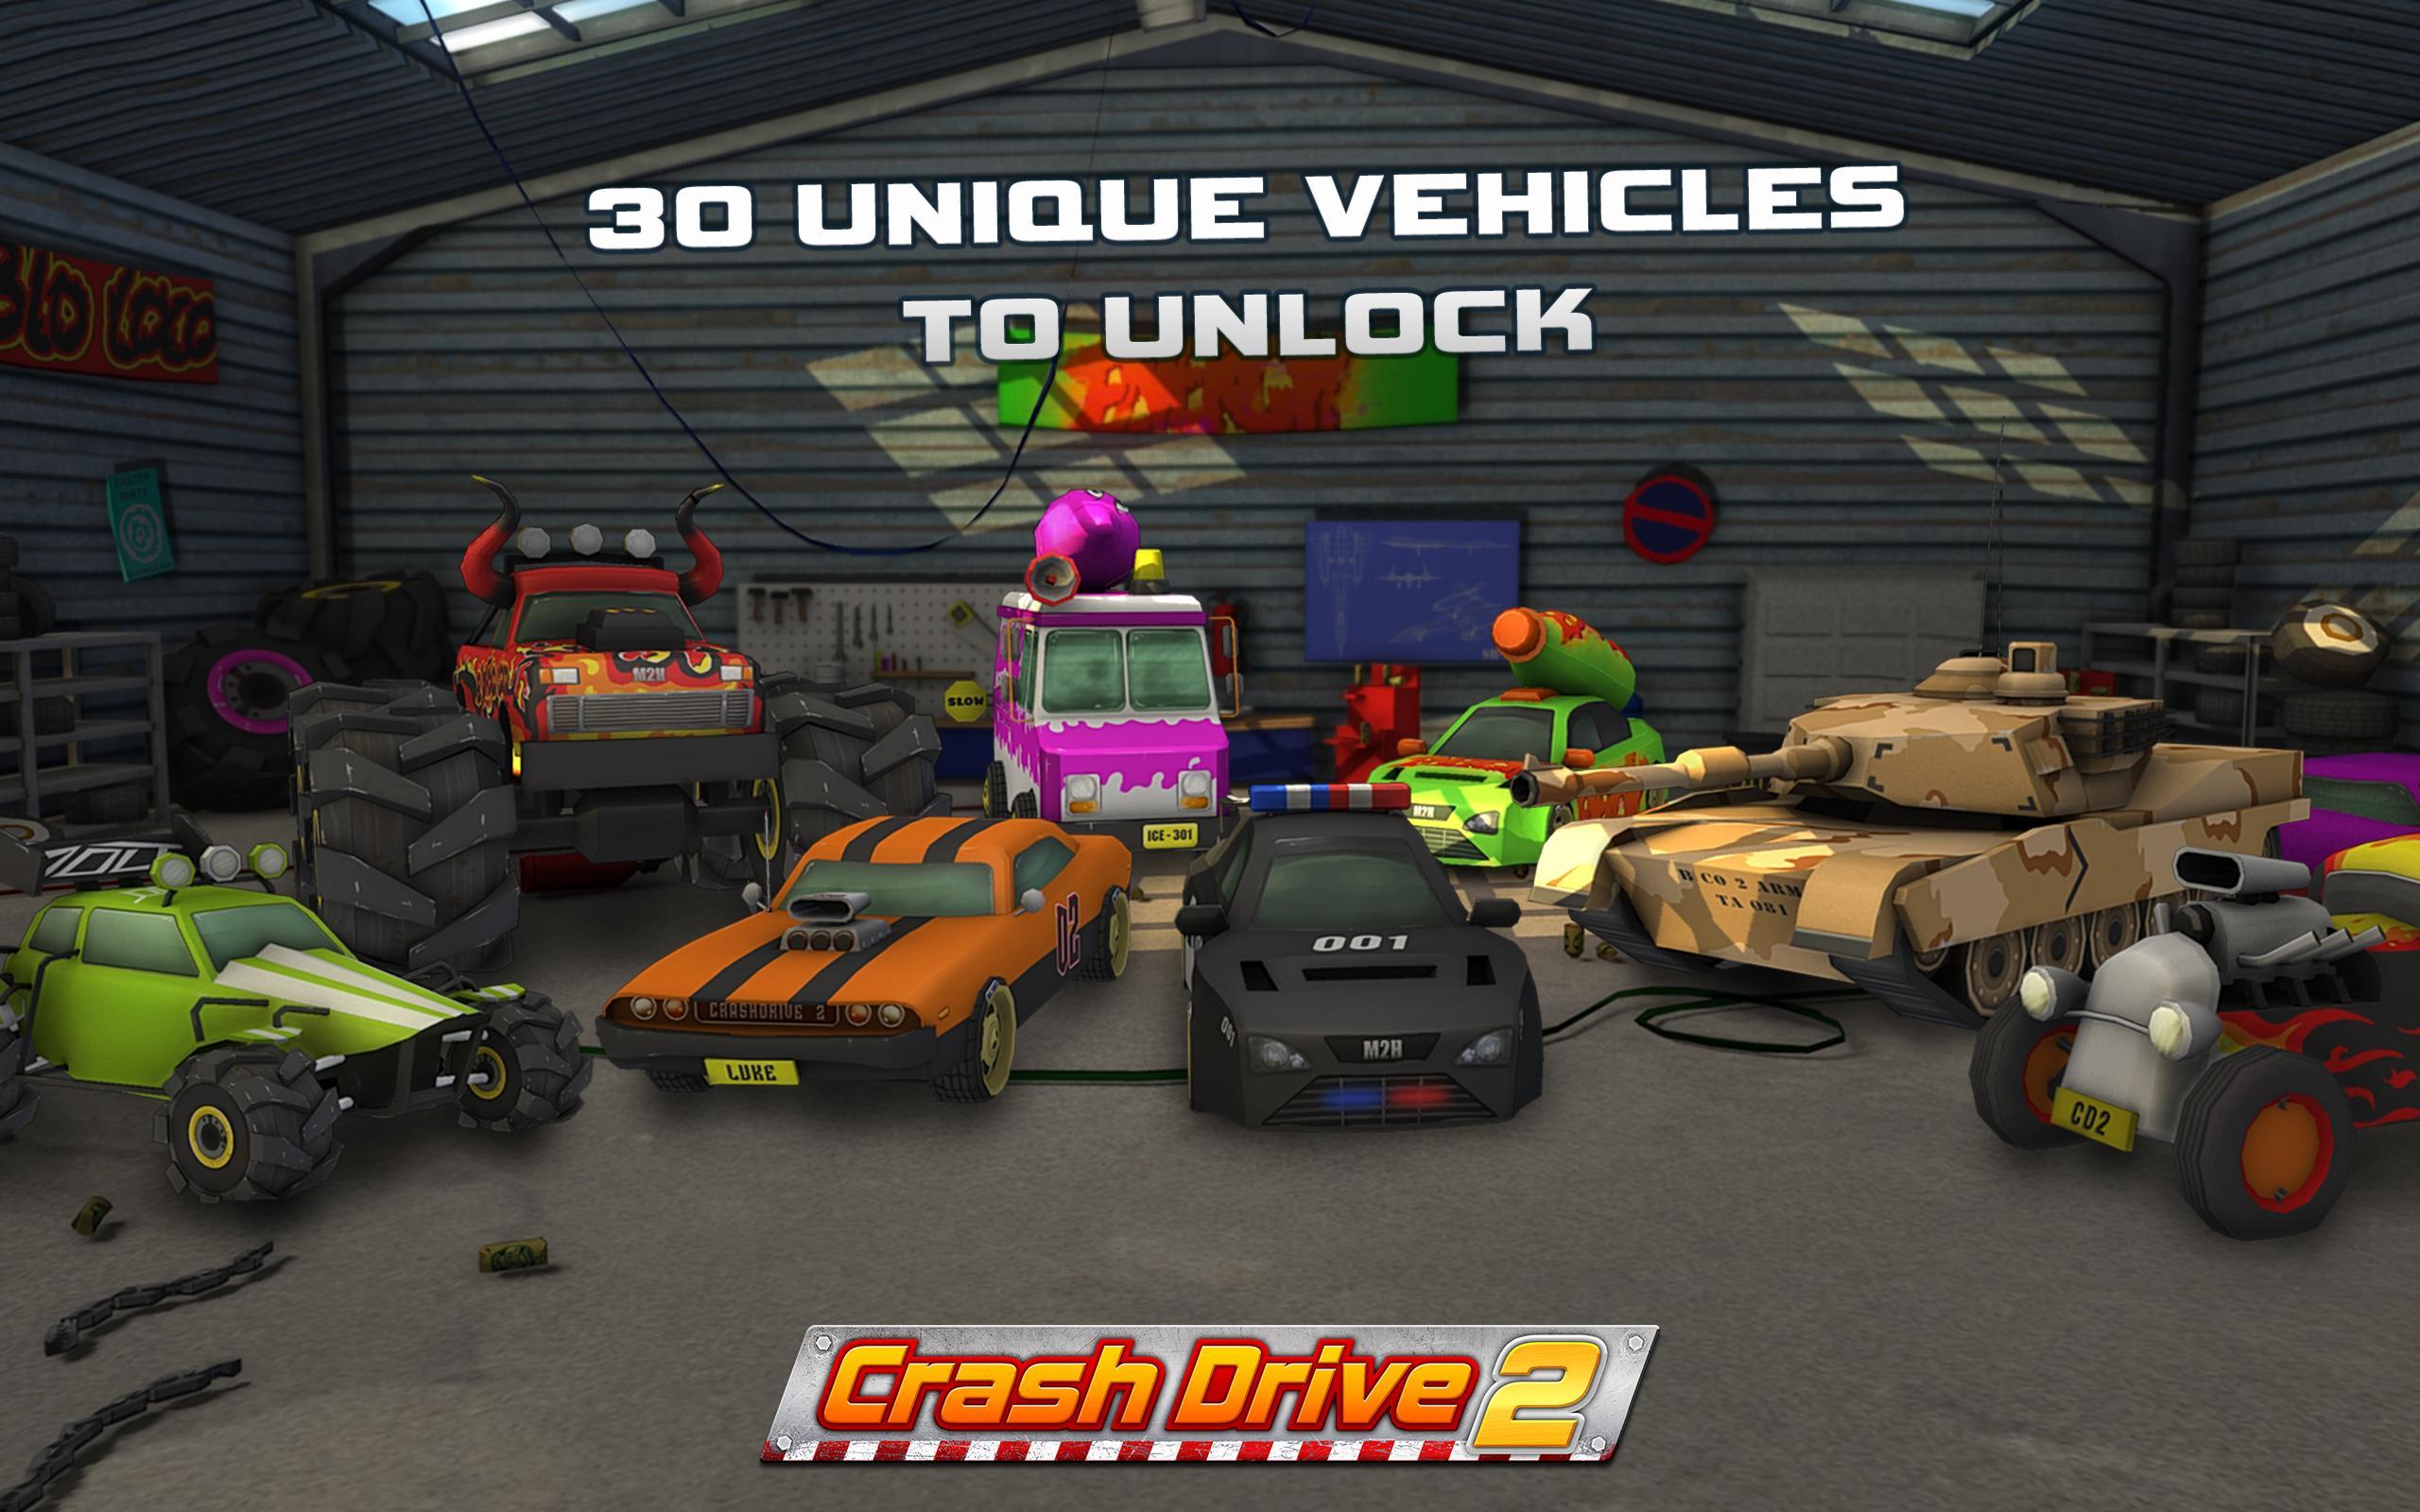 Crash Cars - Driven To Destruction android iOS-TapTap